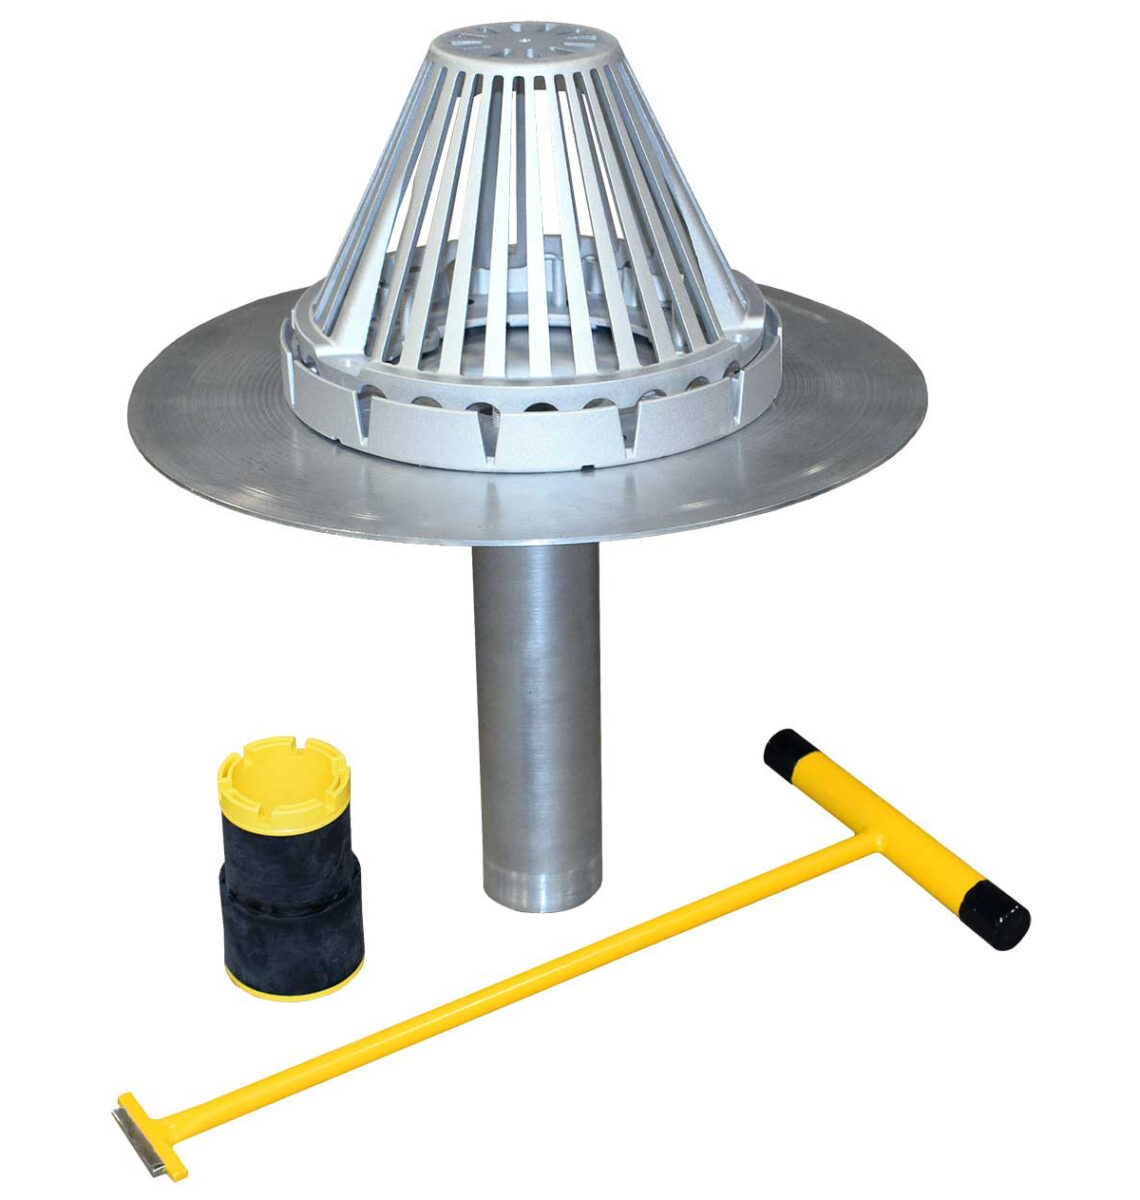 TRUFAST offers the EasySeal retrofit roof drain. This feature-rich drain is designed to quickly address the need to replace existing roof drains in a re-roofing application.